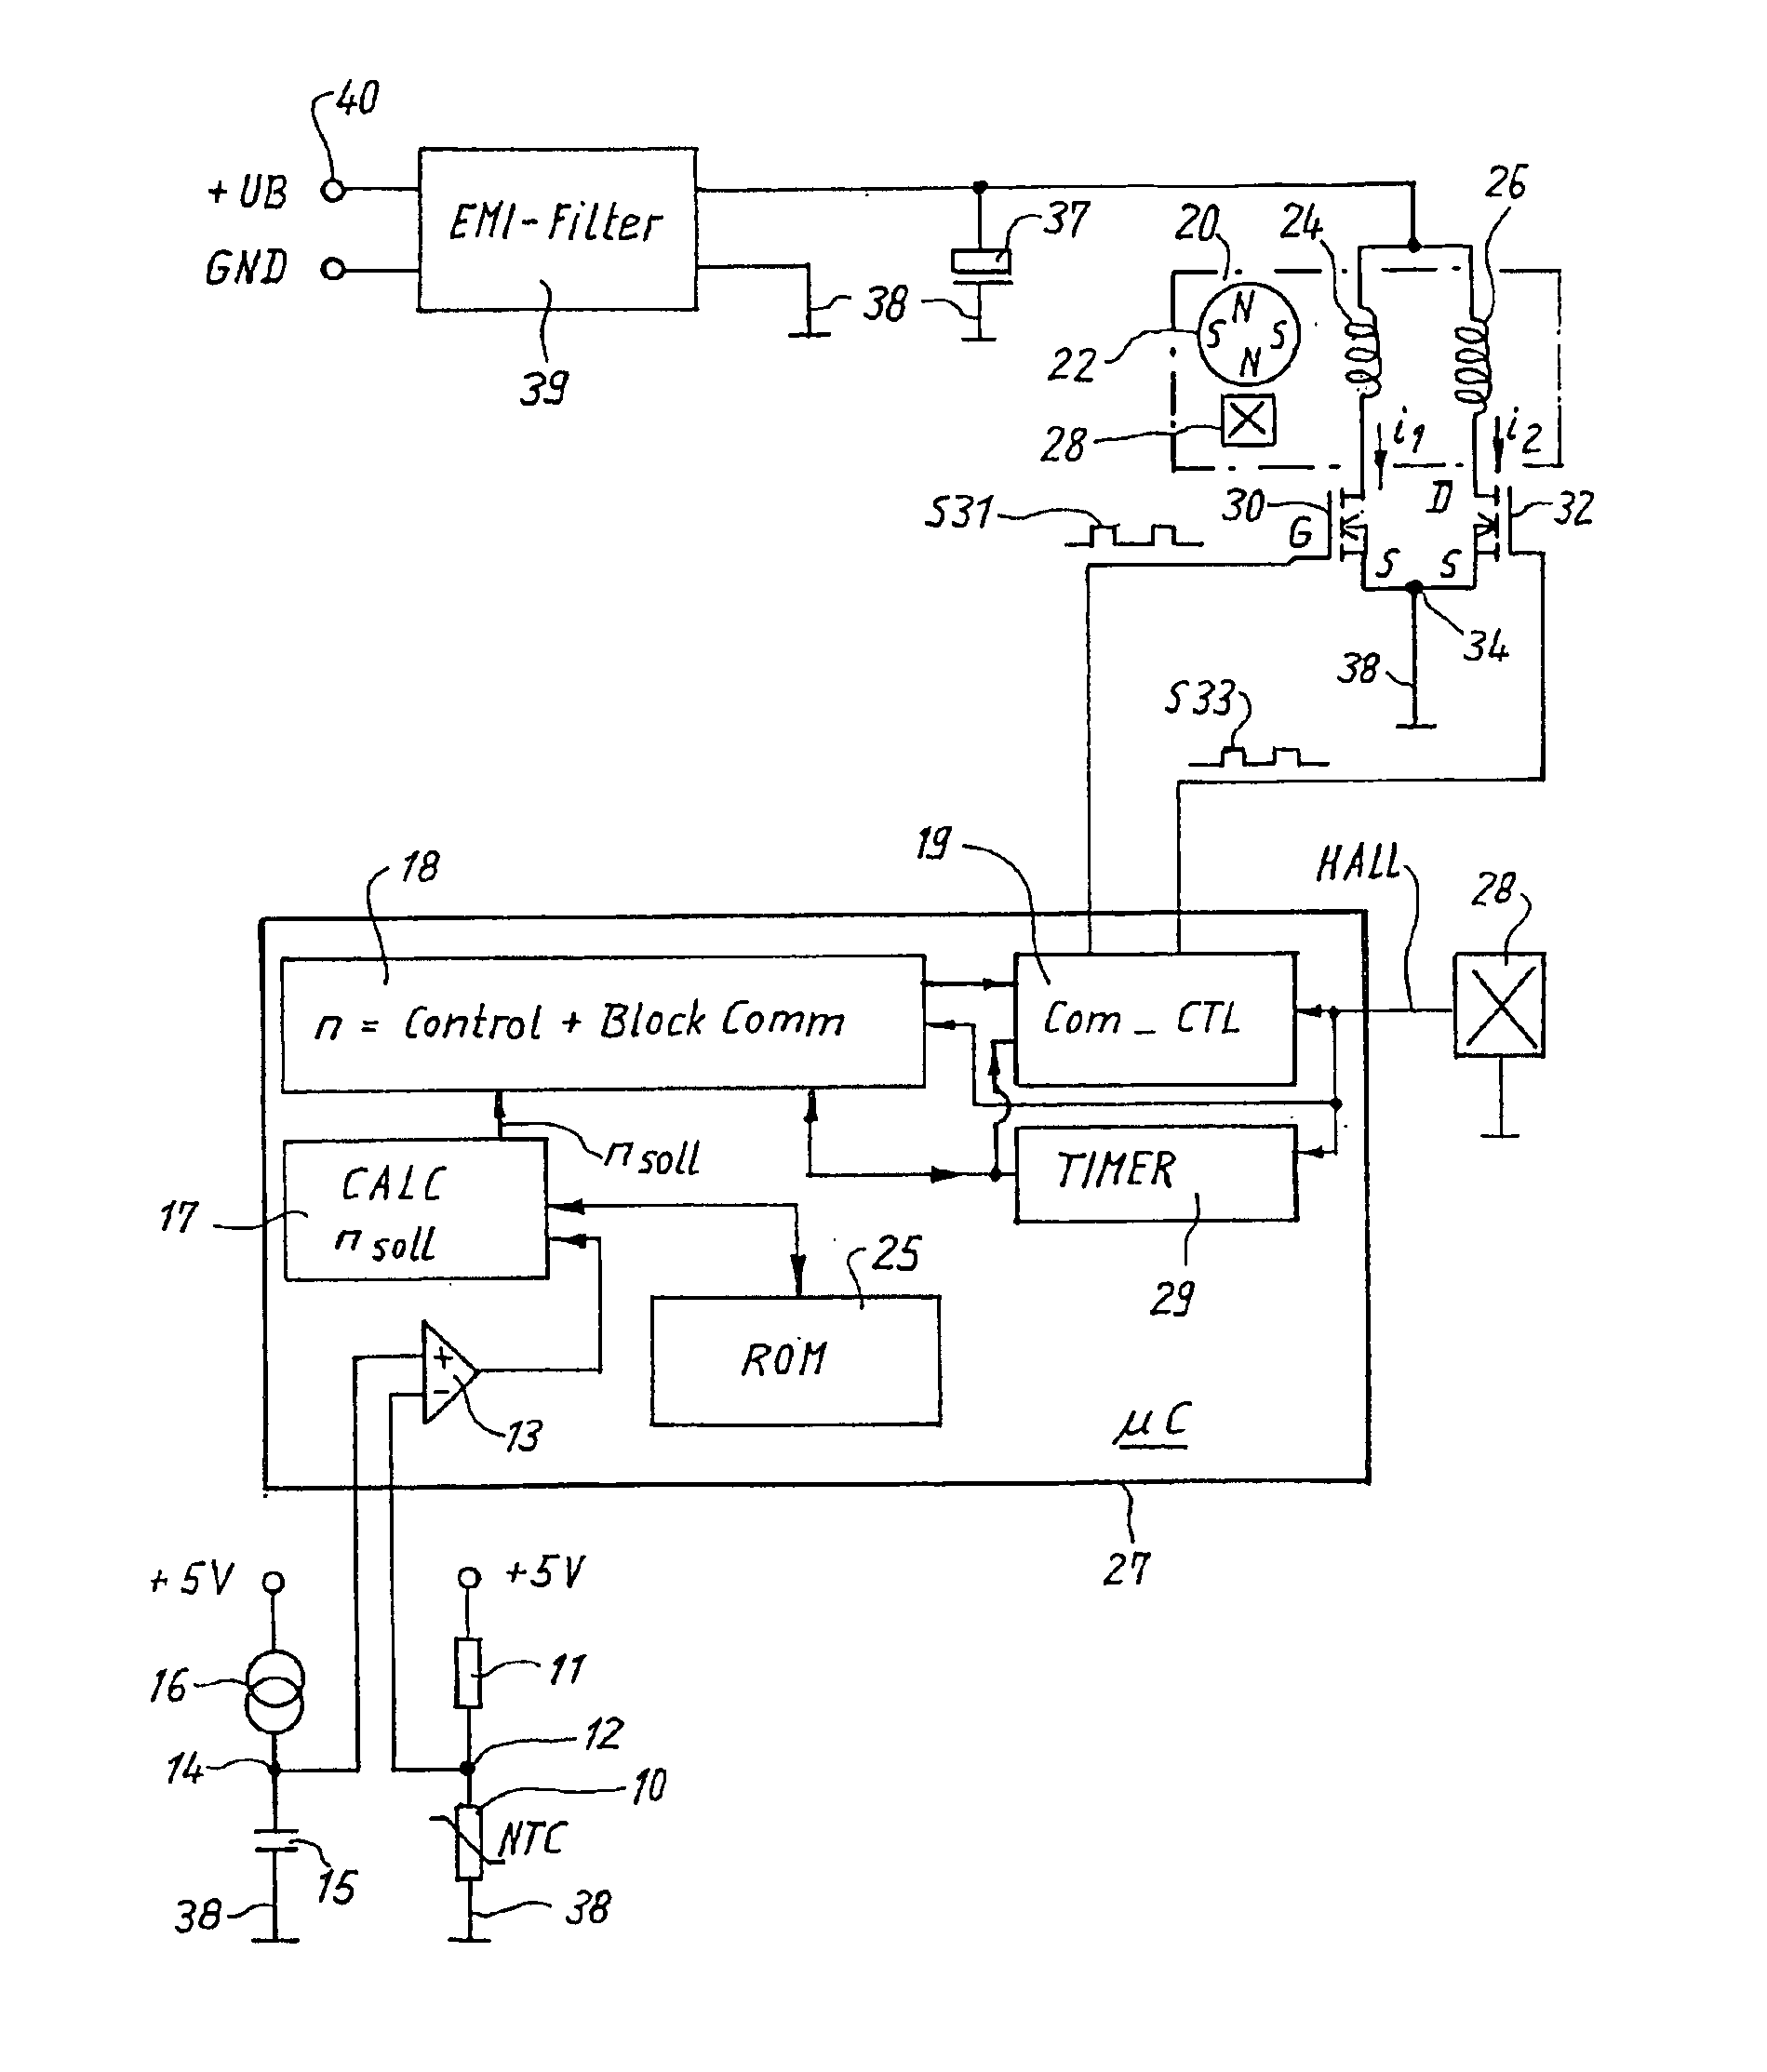 Method of controlling the commutation in an electronically commutated motor, and an electronically commutated motor for carrying out said method